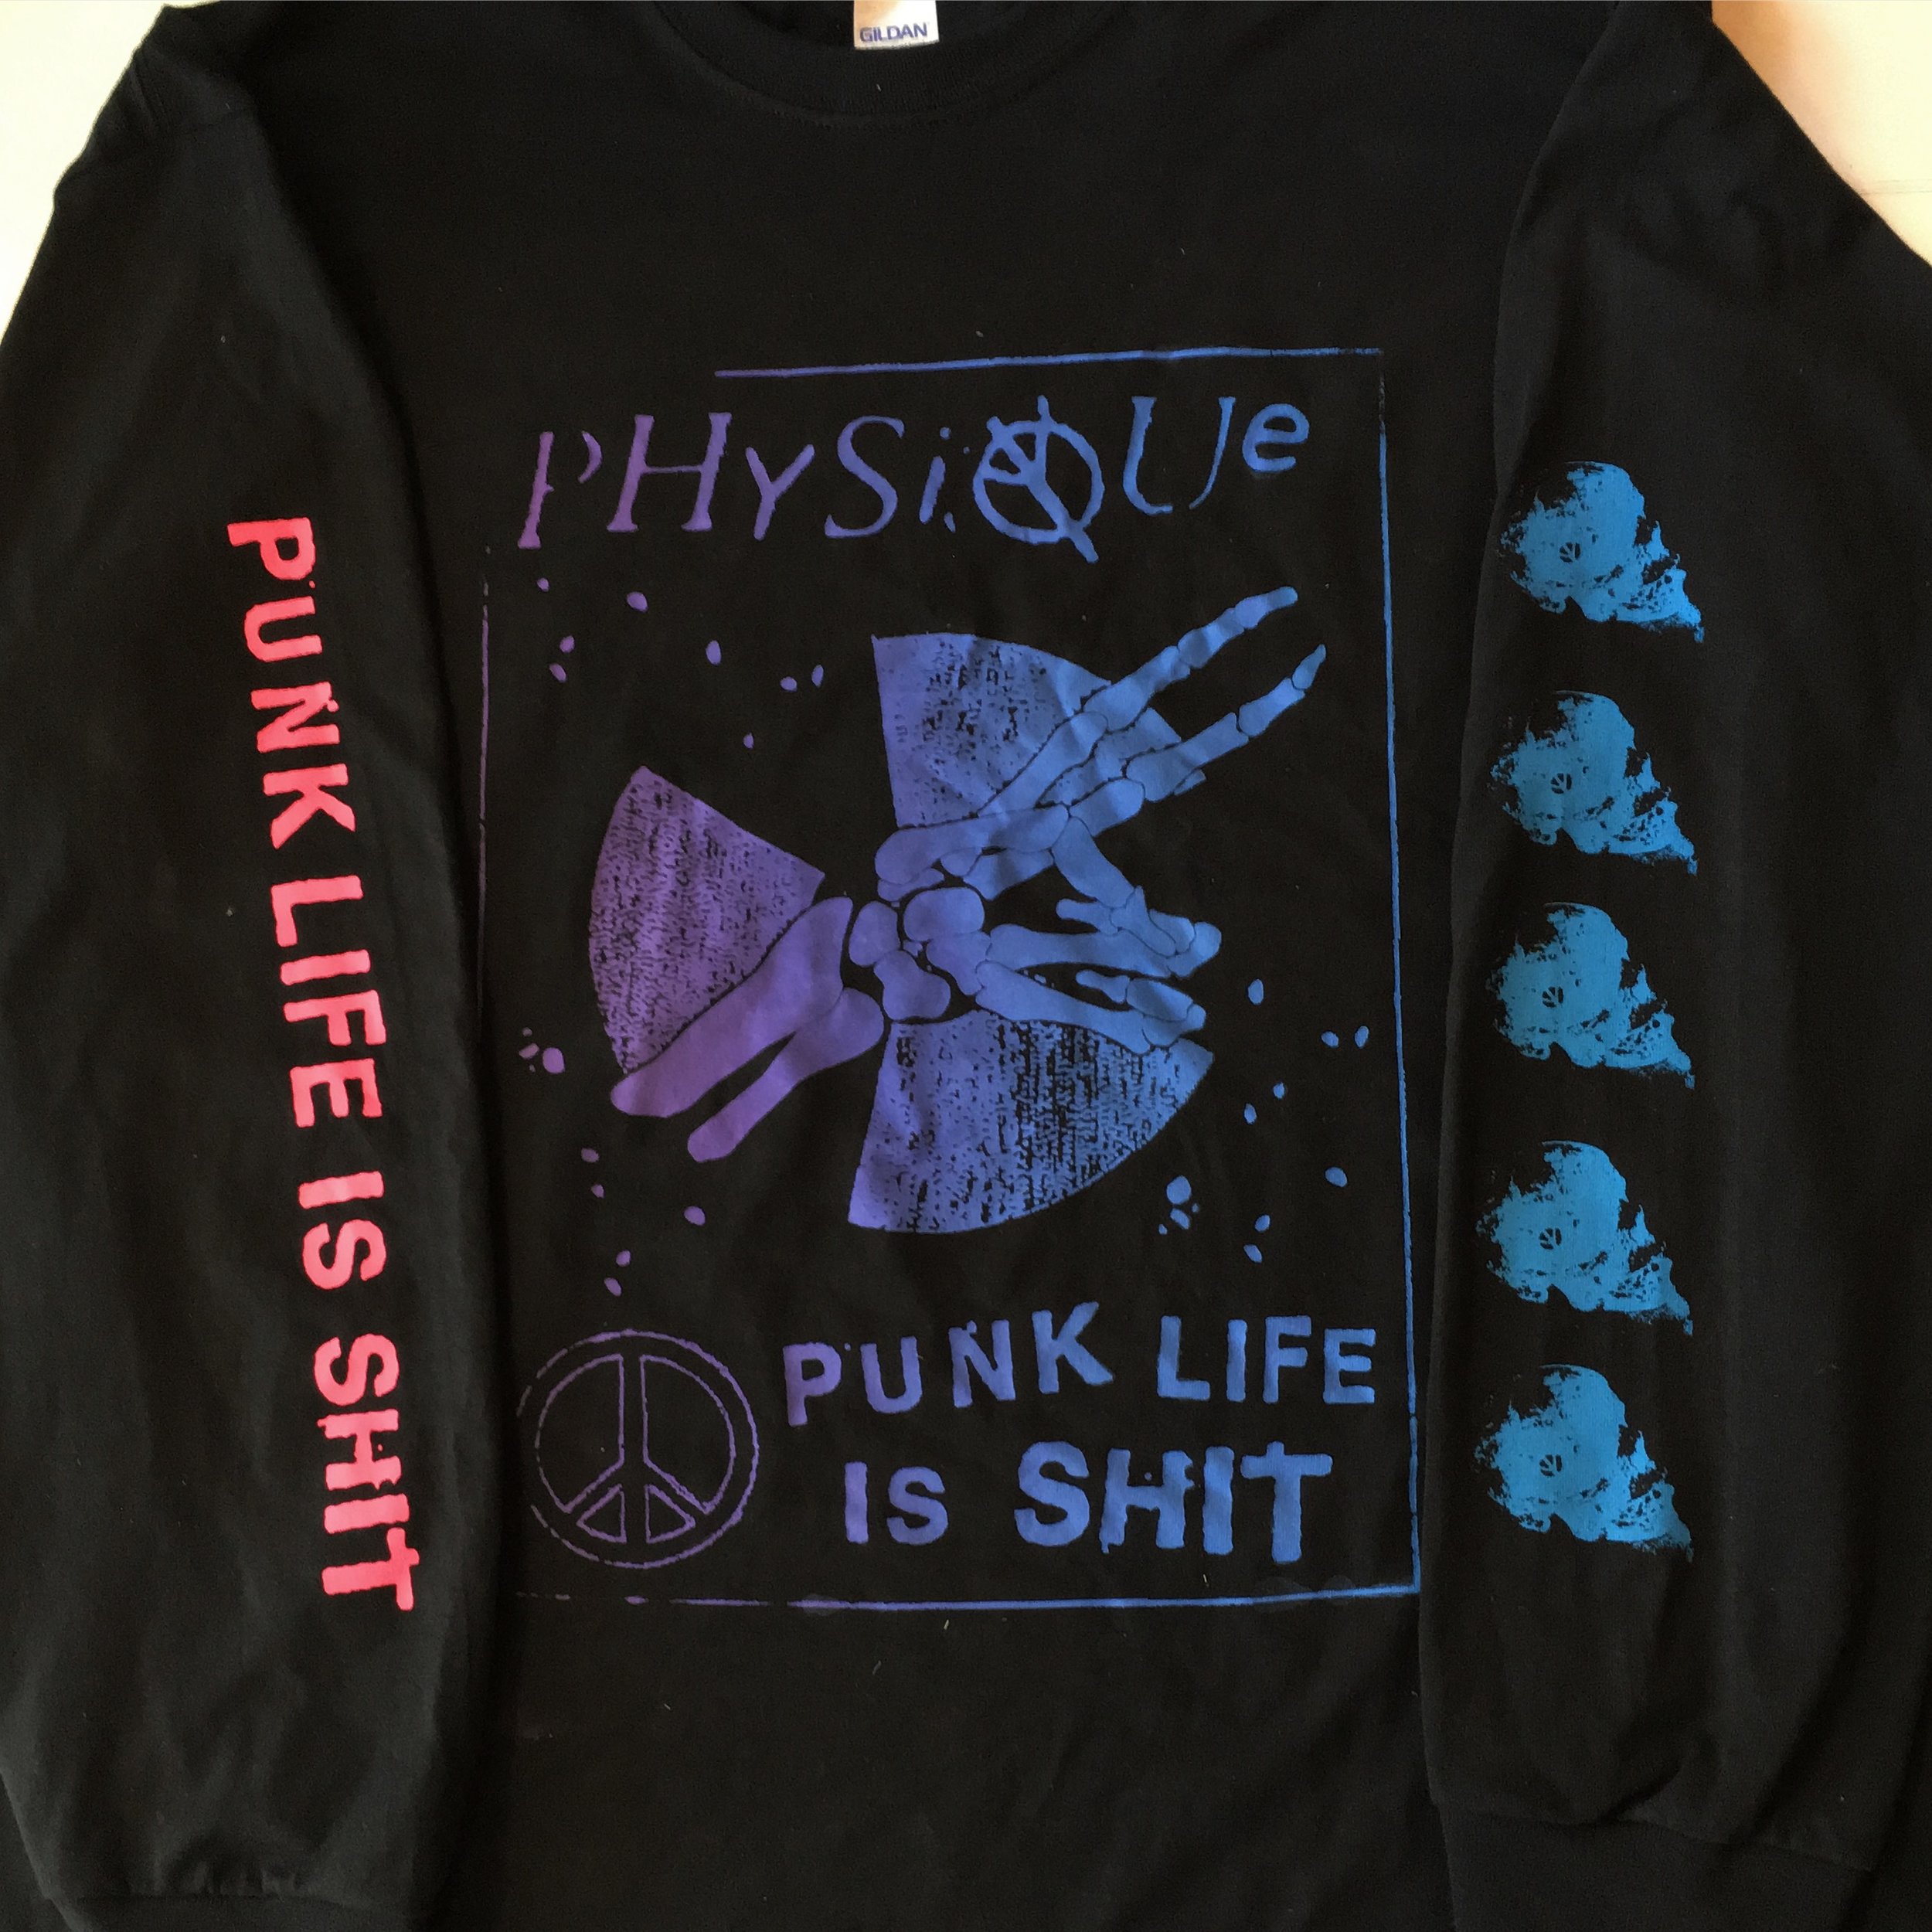  split-fountain w/ 2 sleeve prints for Physique from Olympia, WA 